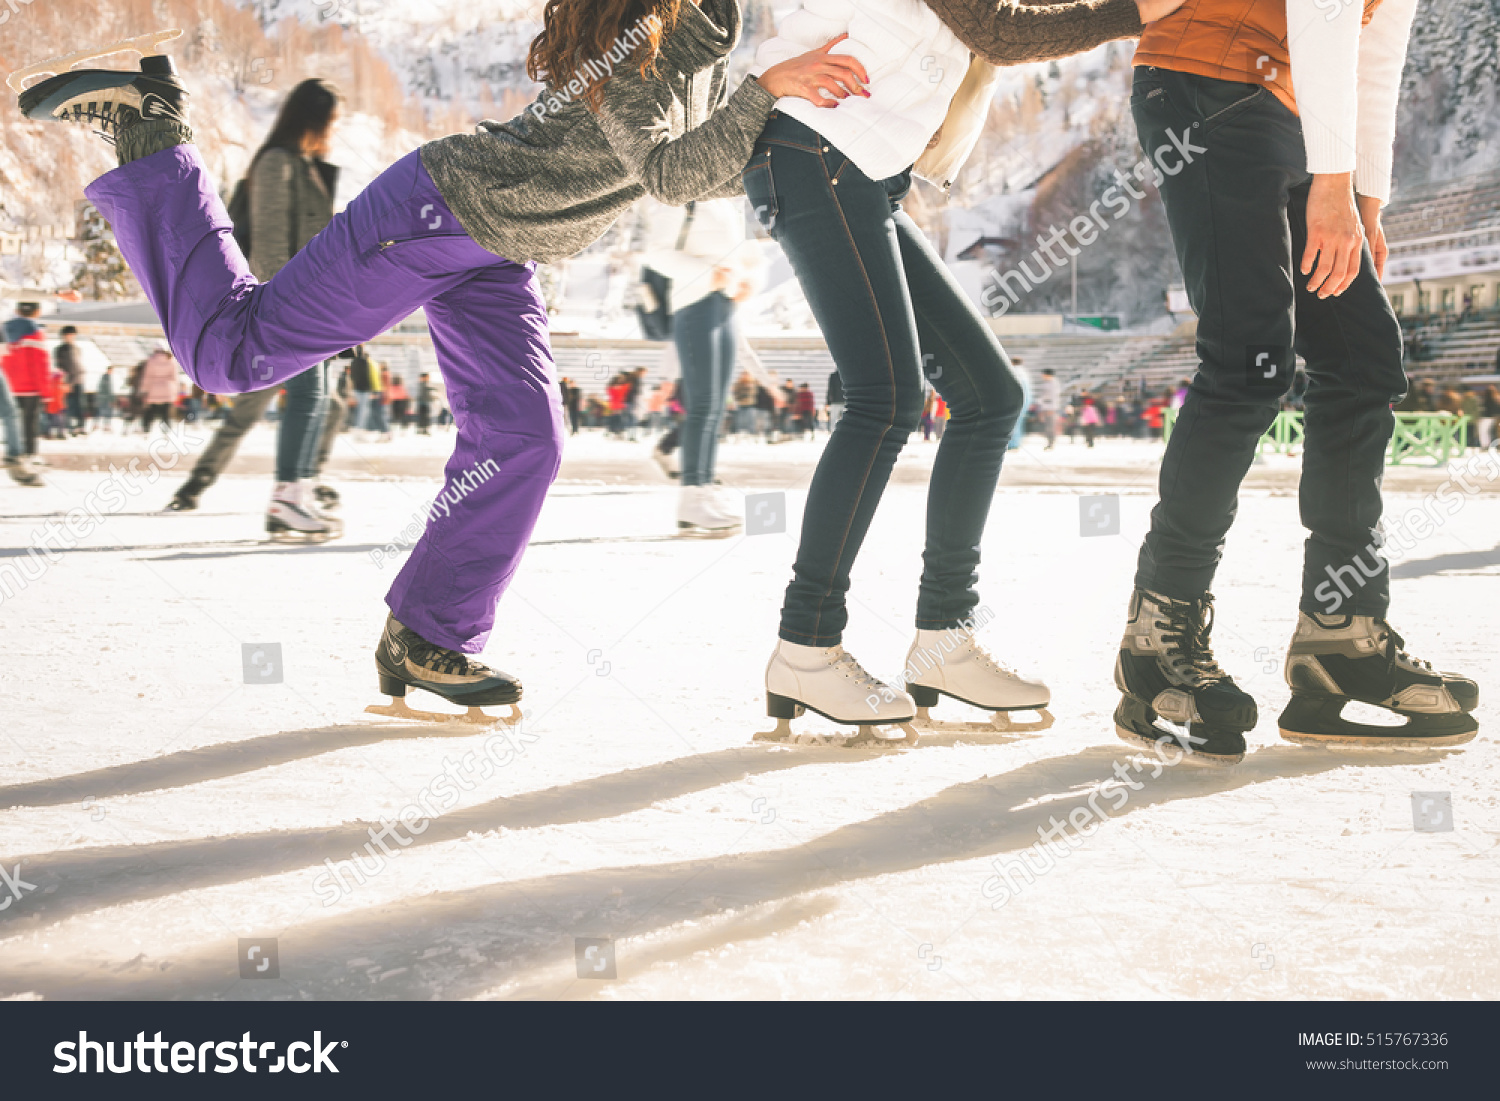 Funny teenagers girls and boy skating outdoor, ice rink #515767336